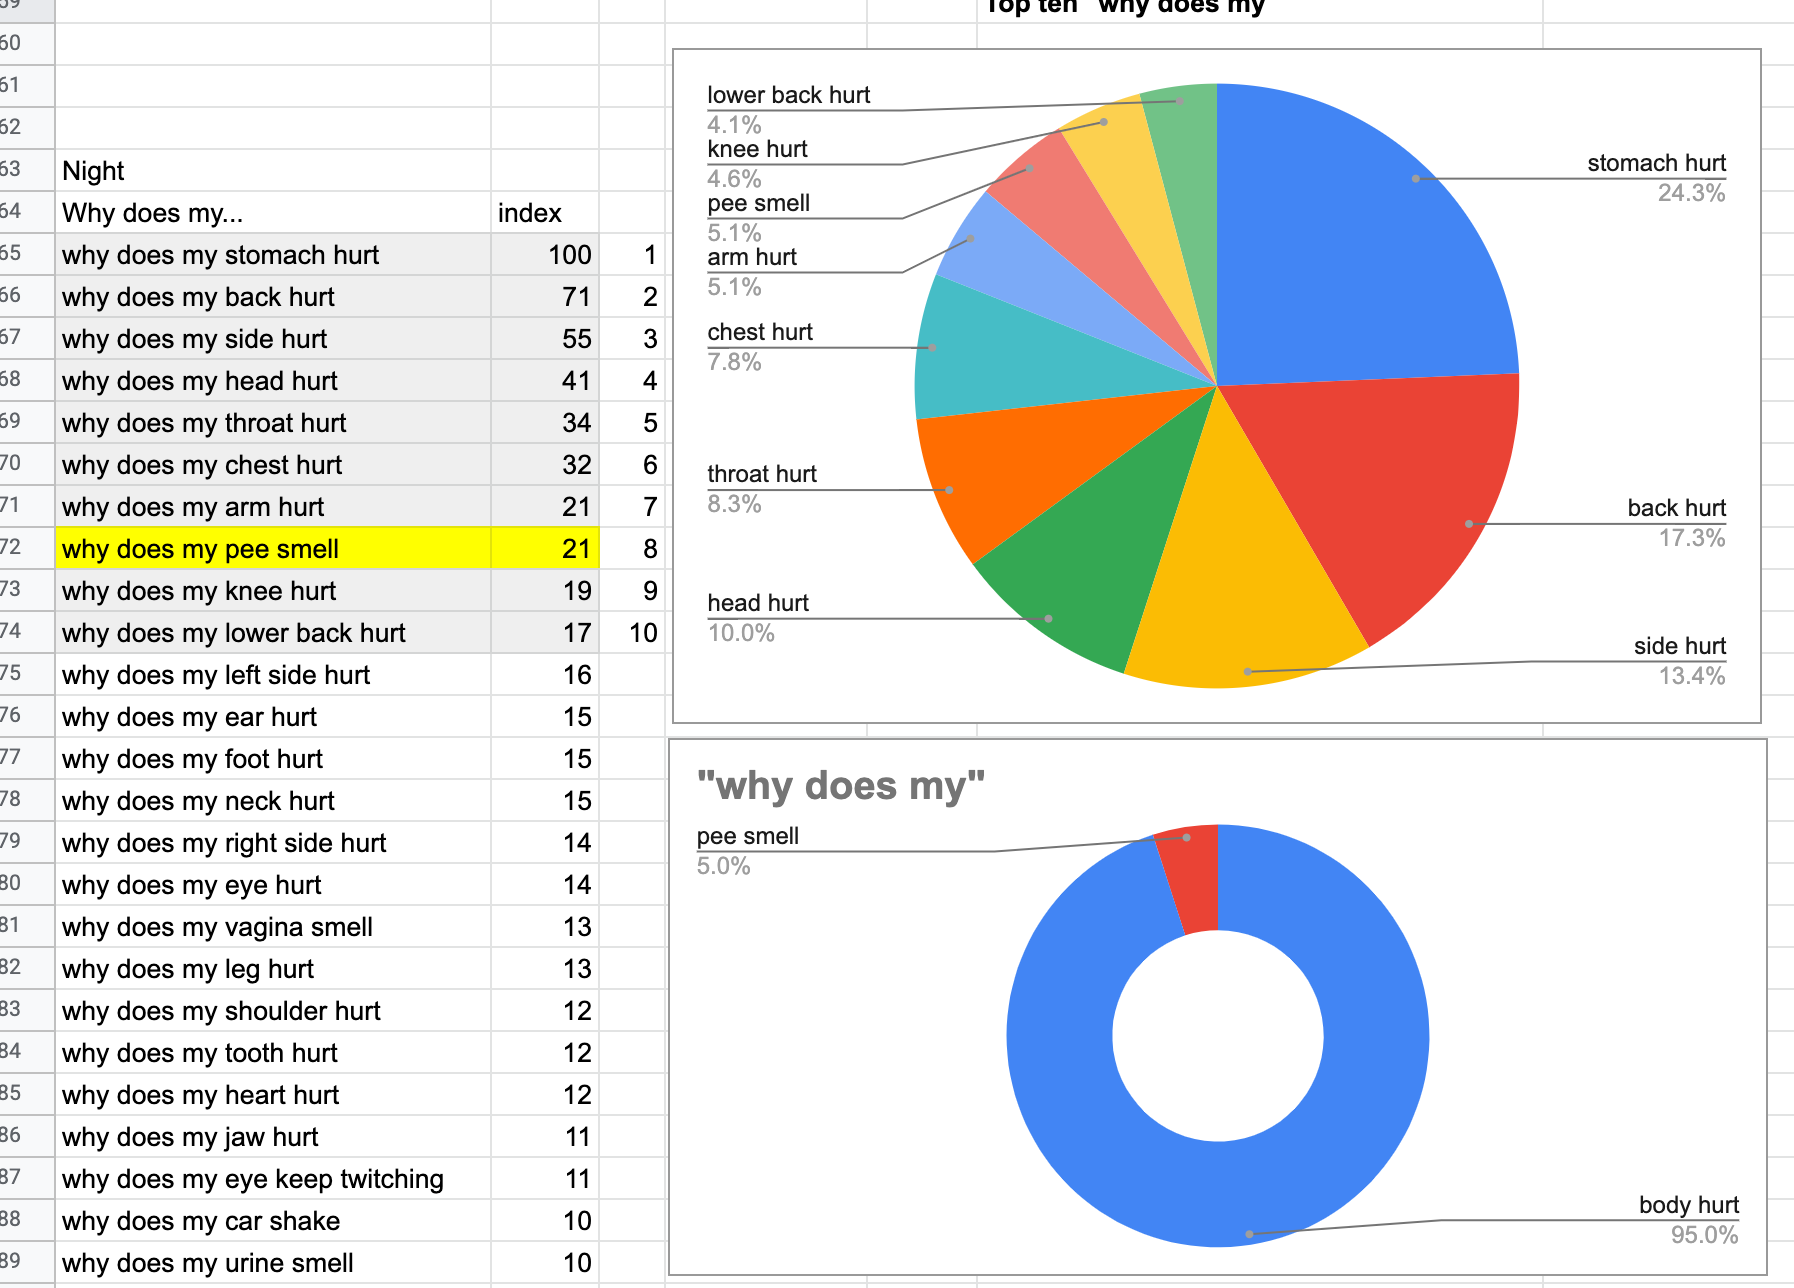 Another screenshot of a spreadsheet showing various ways to attempt illustrations of the top trends from google